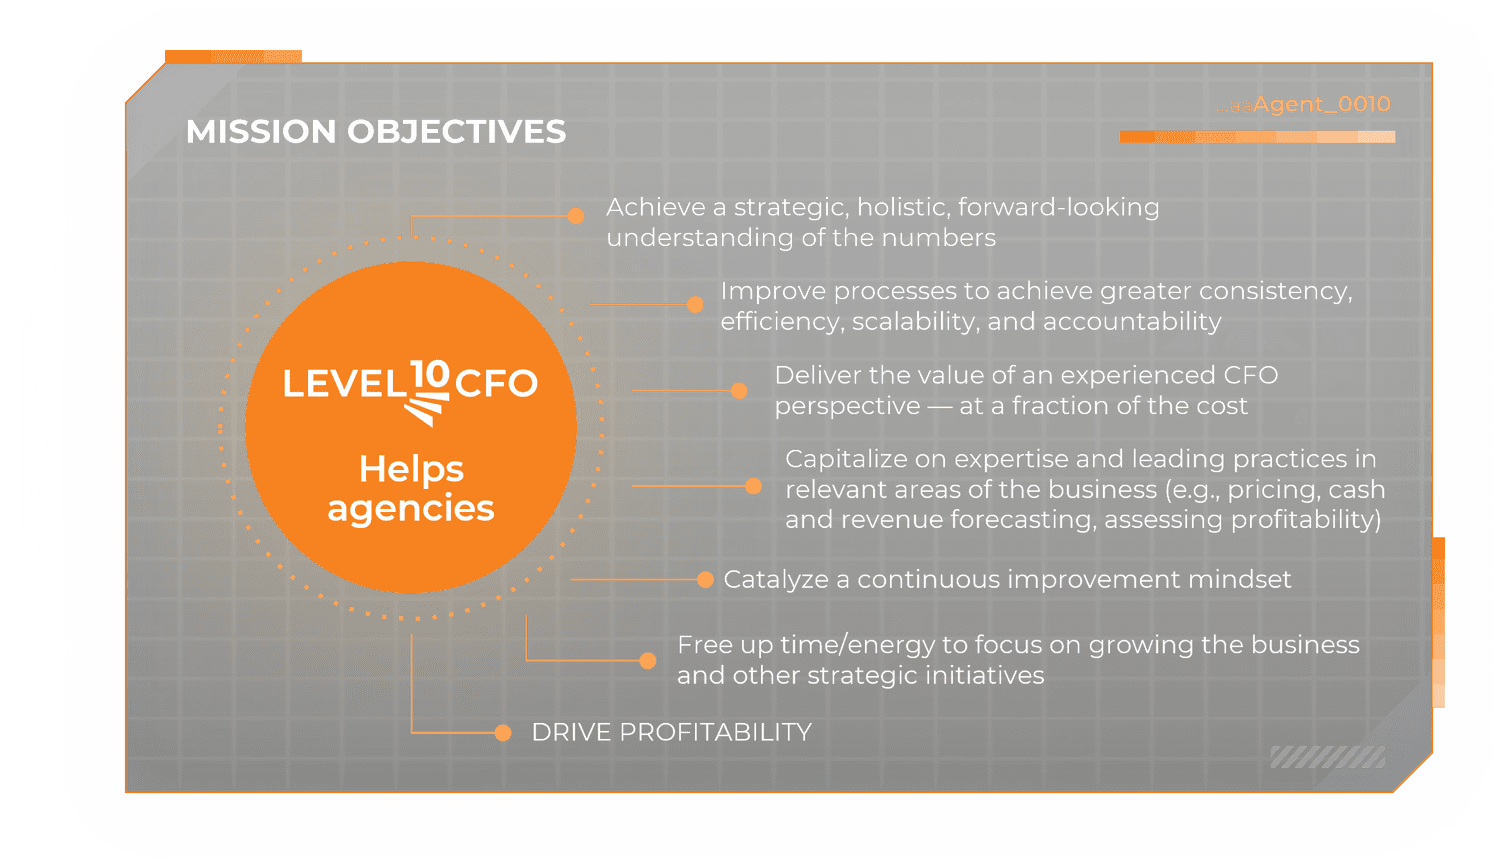 mission objectives info graphic